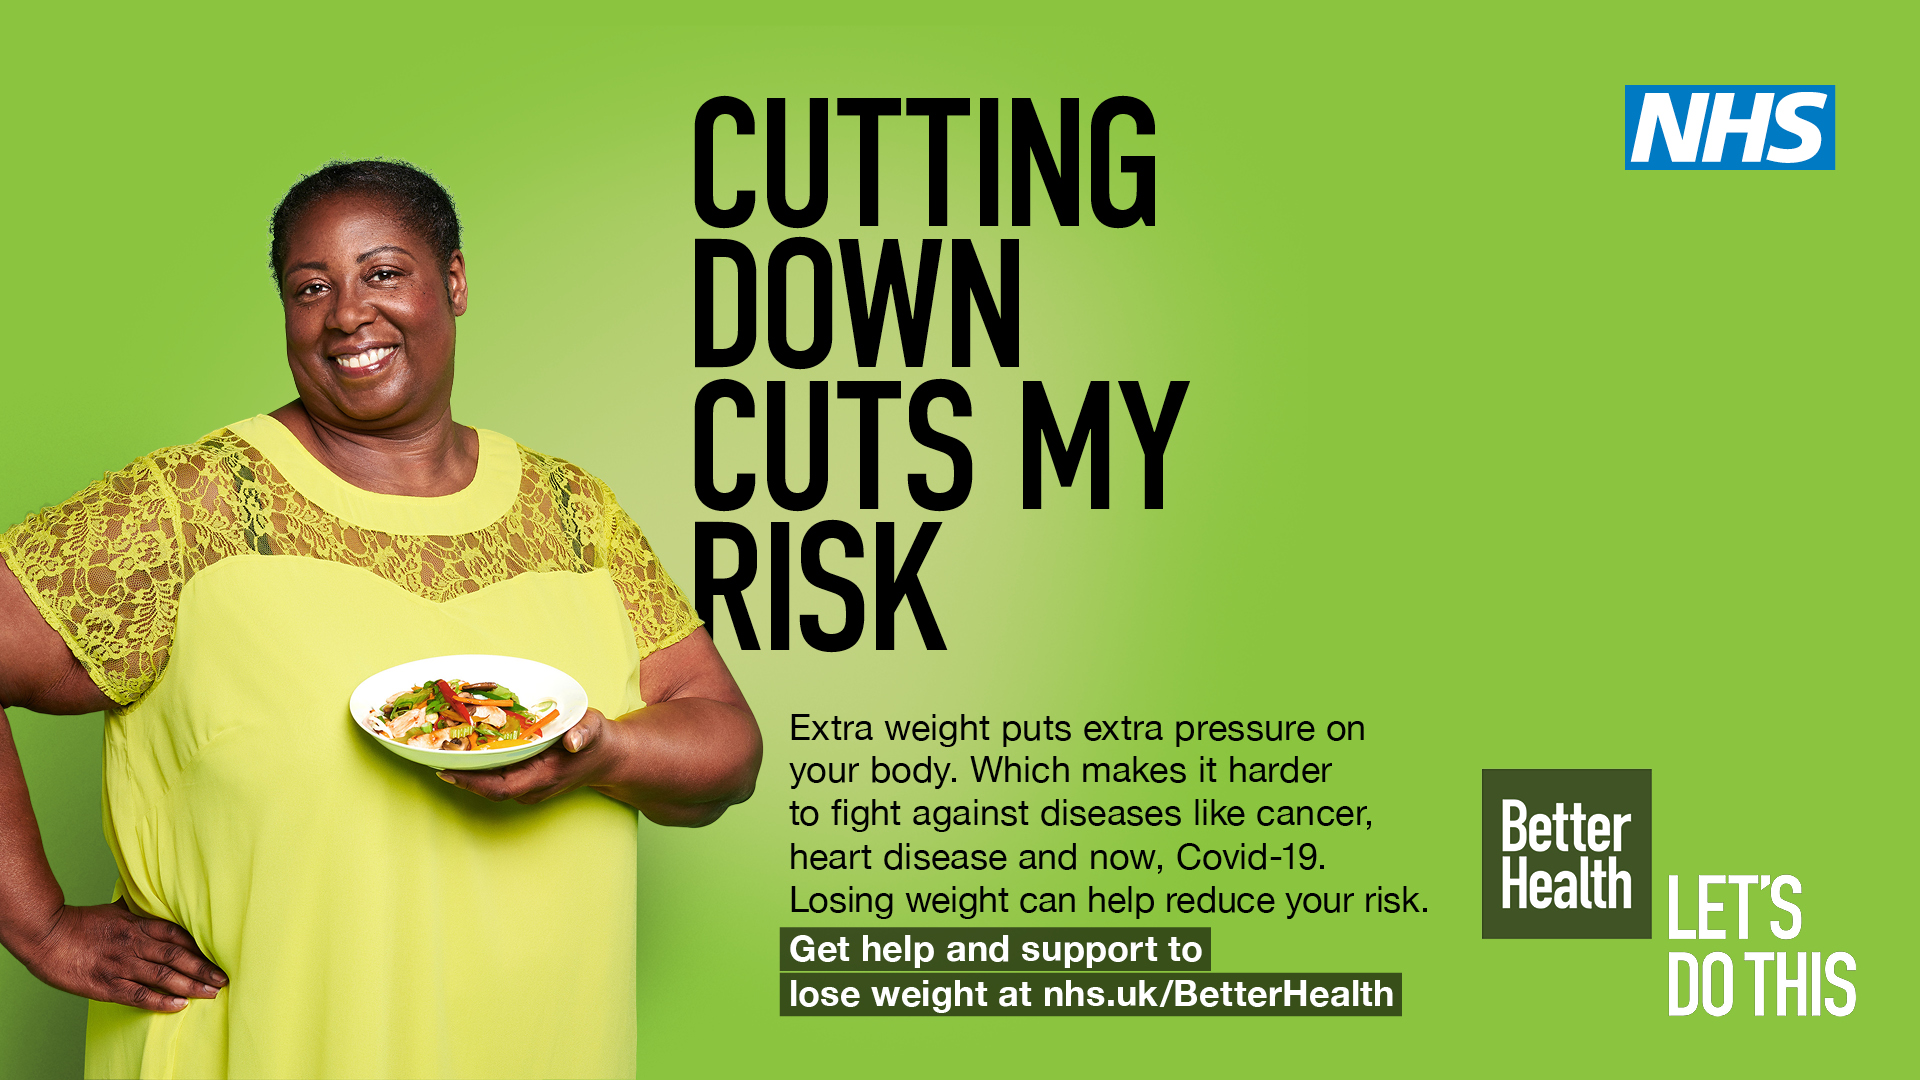 Better Health campaign launches